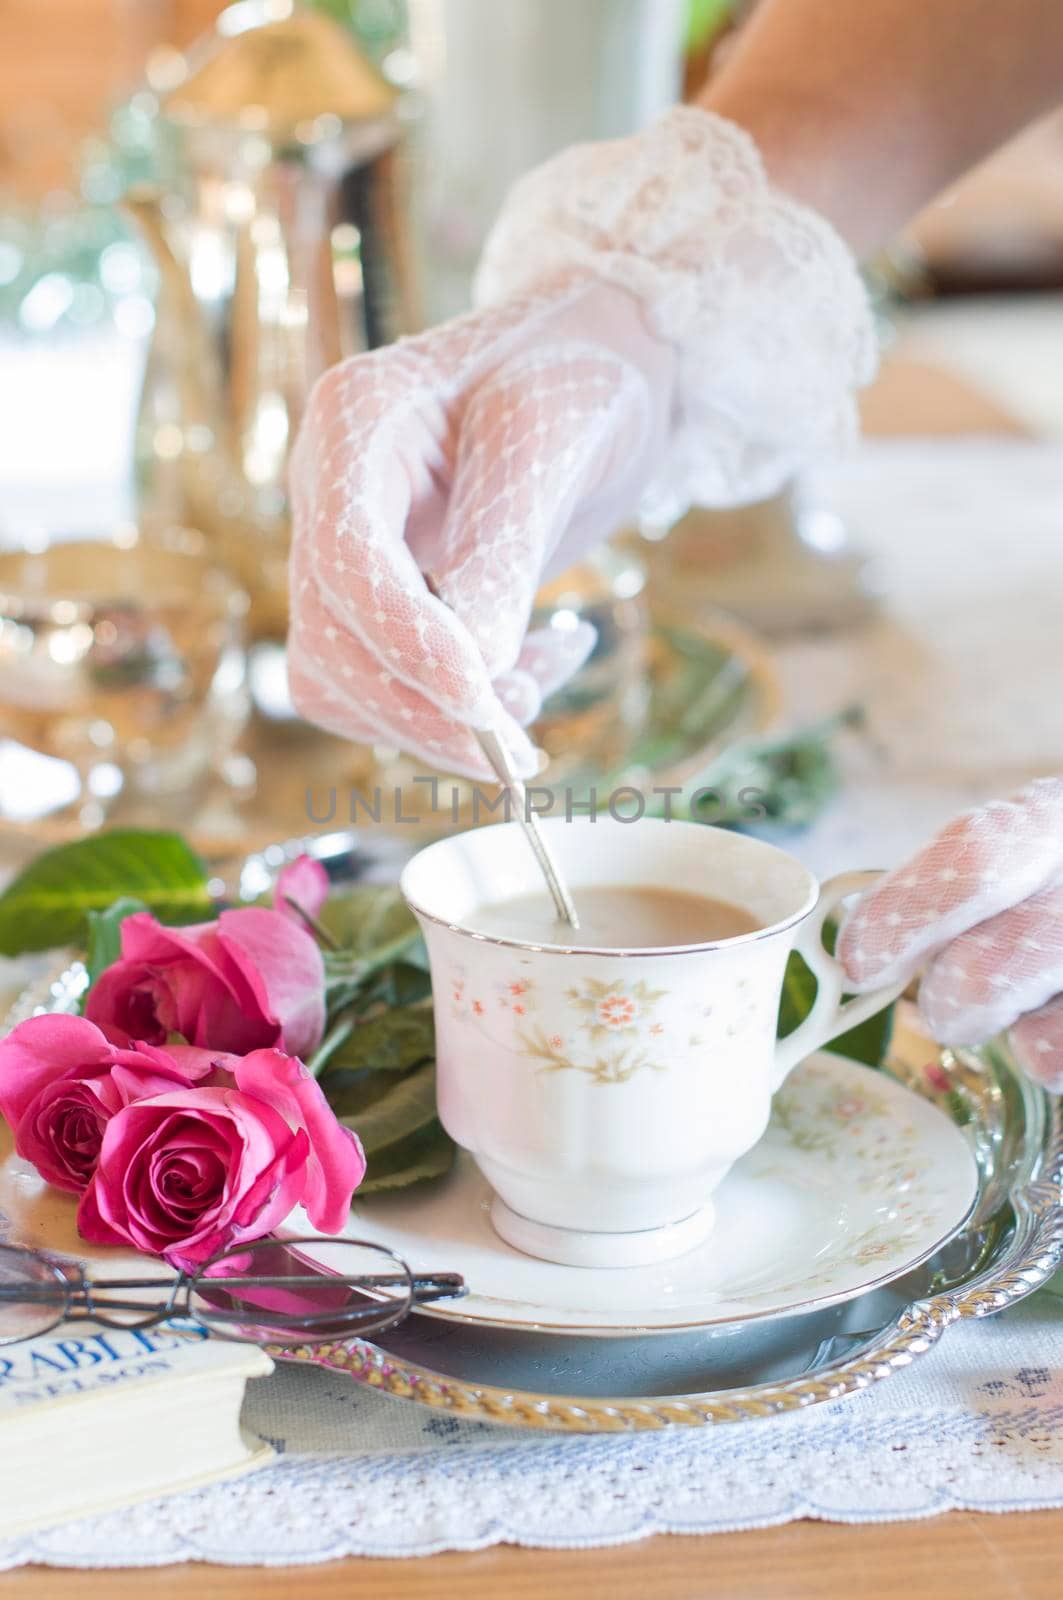 English retro still life and a woman's hand in a white lace glove stirring coffee with milk in an elegant cup from Chinese porcelain, light and airy early morning mood. High quality photo